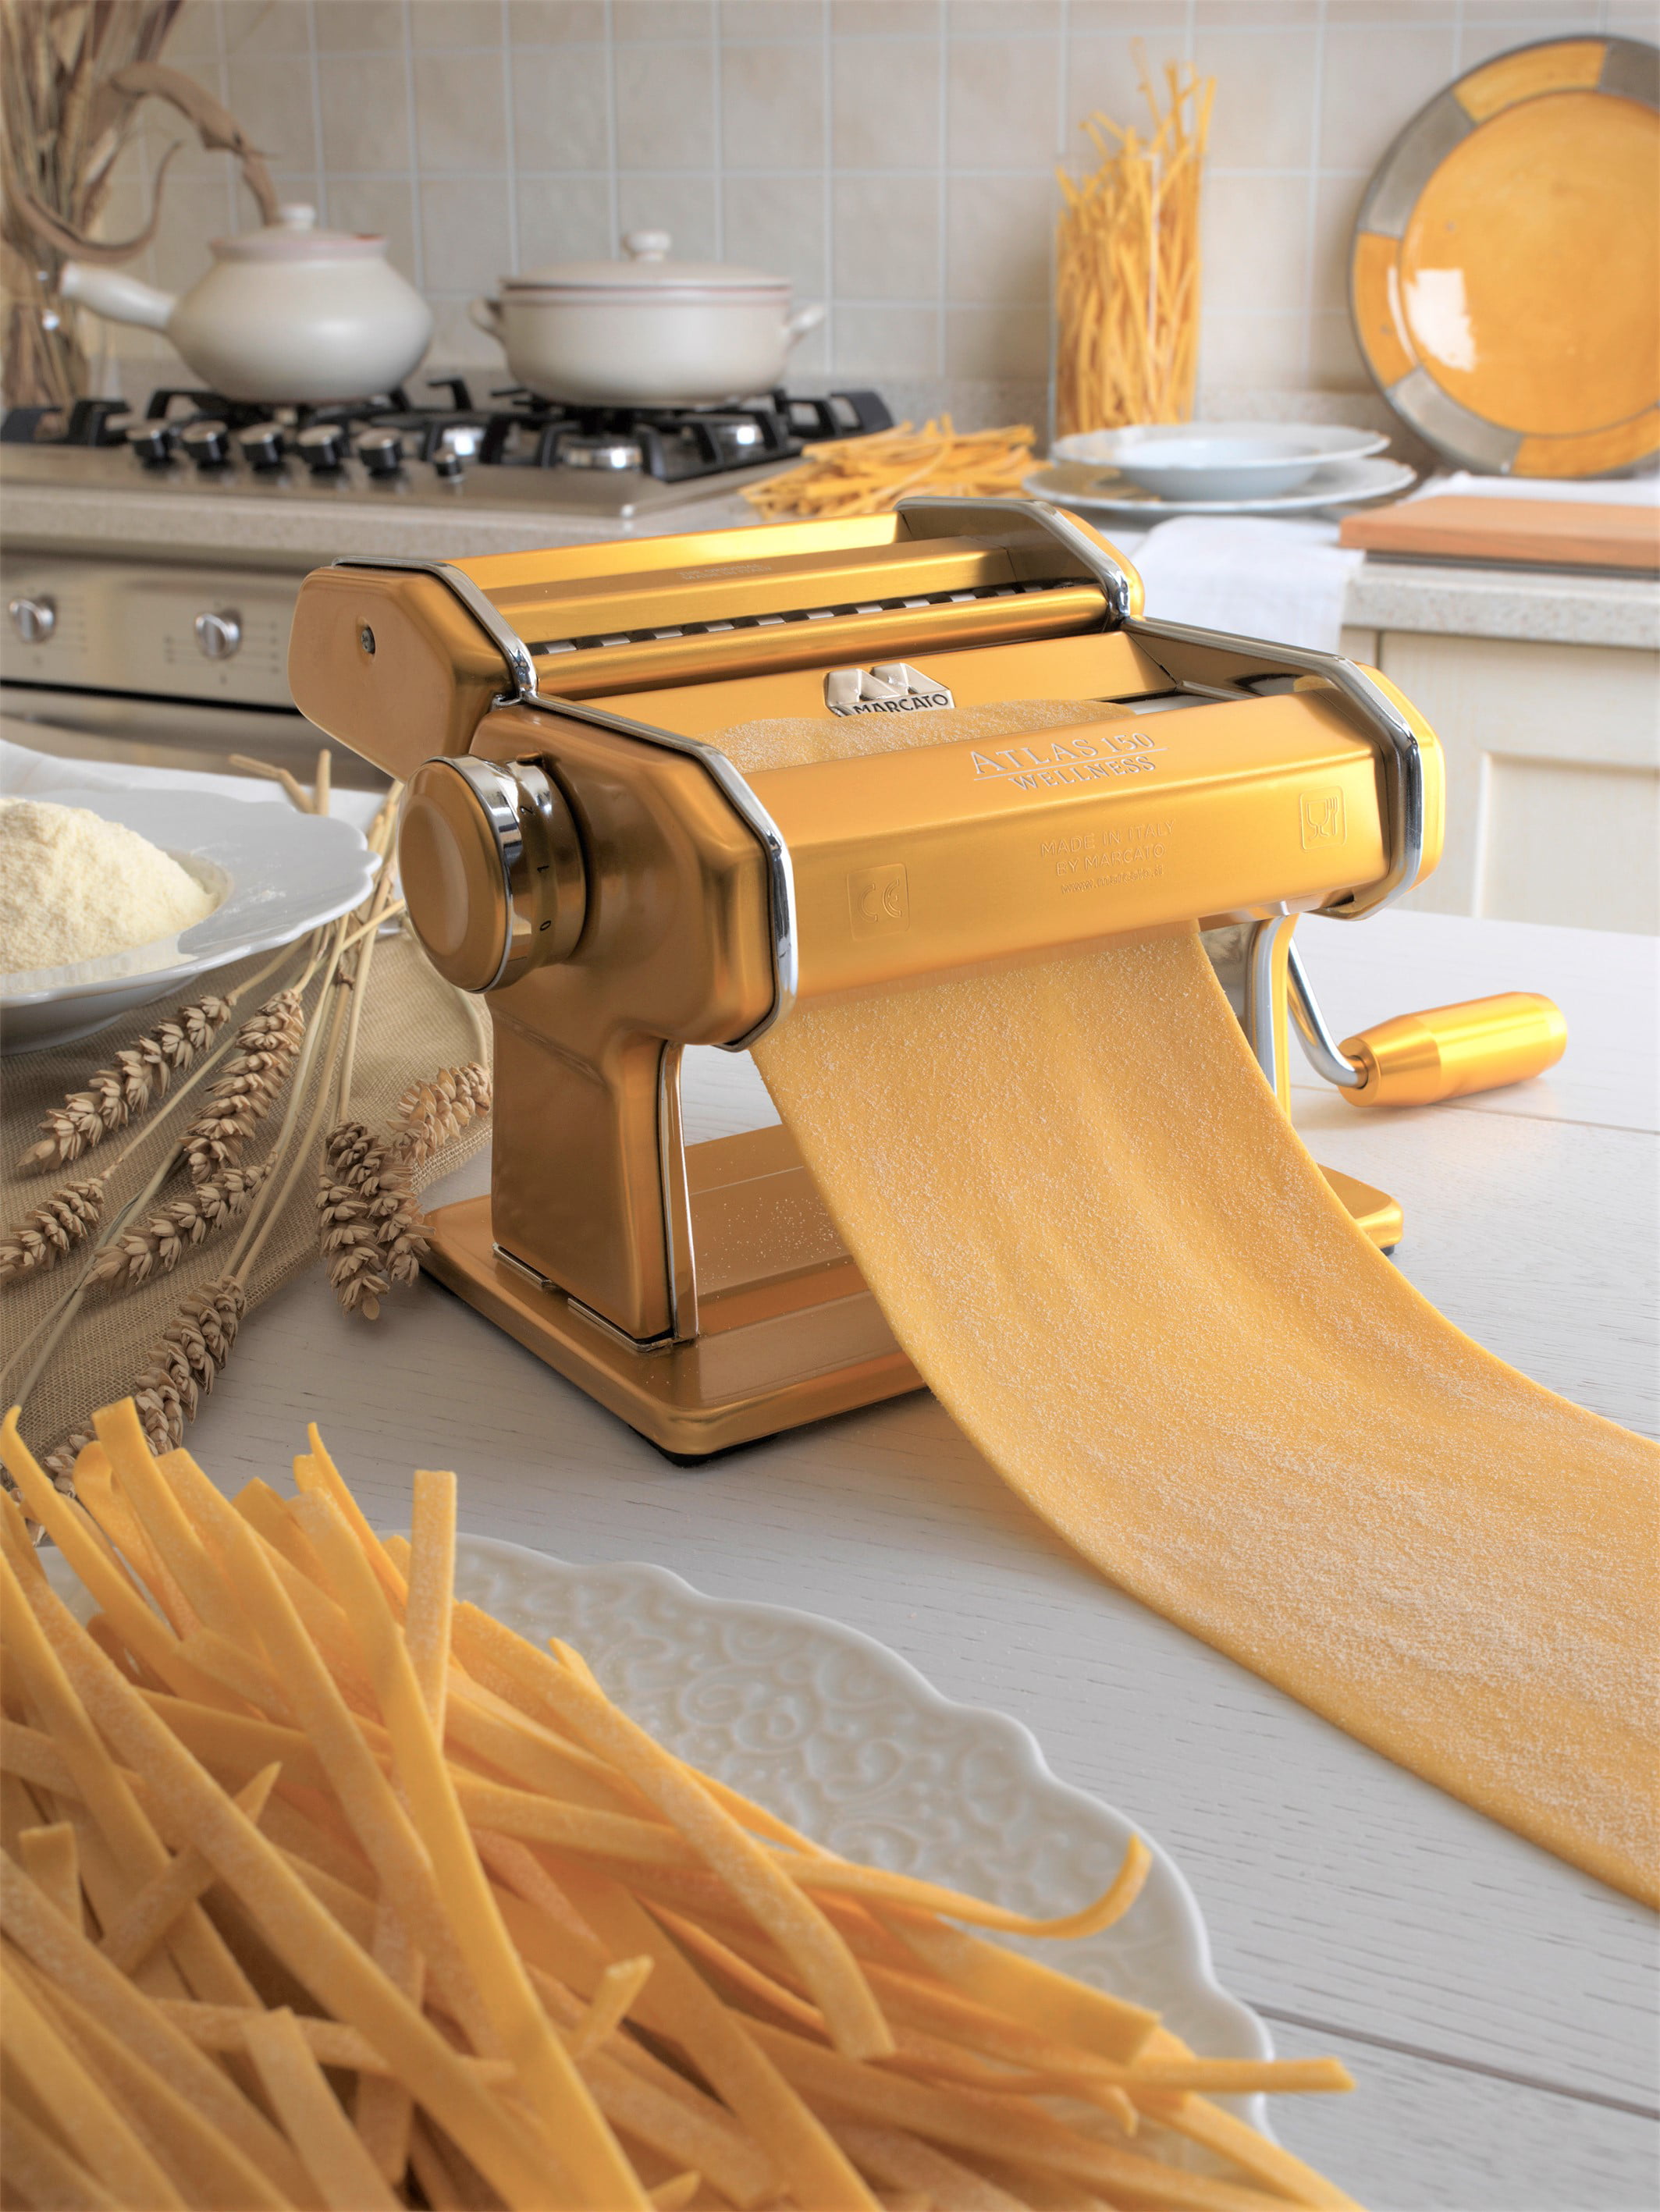 Marcato Atlas Pasta Machine, Made in Italy, Stainless Steel, Gold, Includes  Pasta Cutter, Hand Crank, and Instructions 